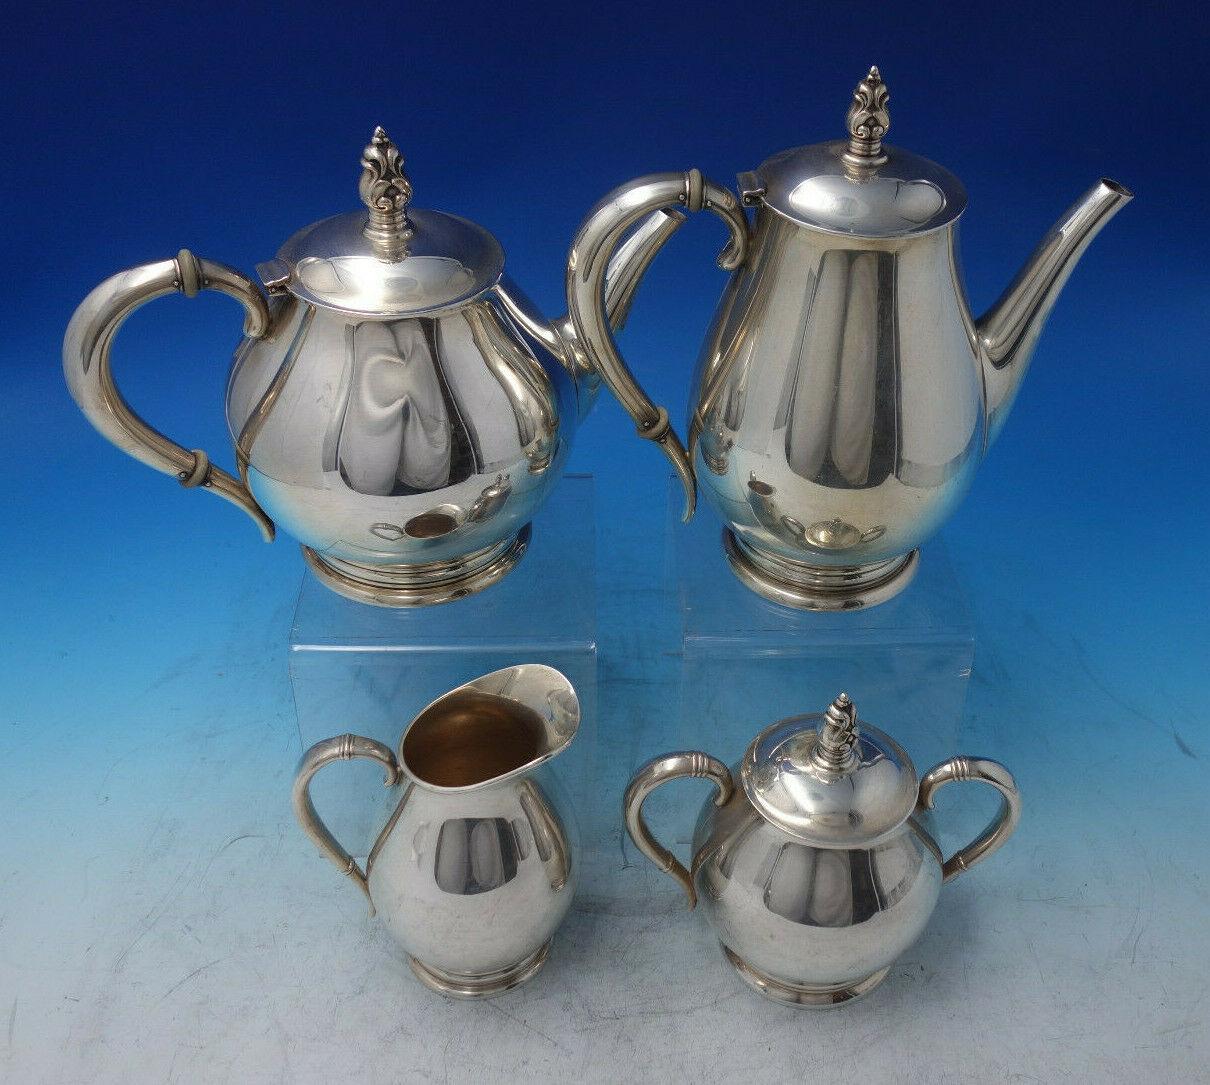 Royal danish by International

Royal danish by International sterling silver 4-piece Tea Set marked #C353. This set includes:


1 - Coffee Pot: Measures 9